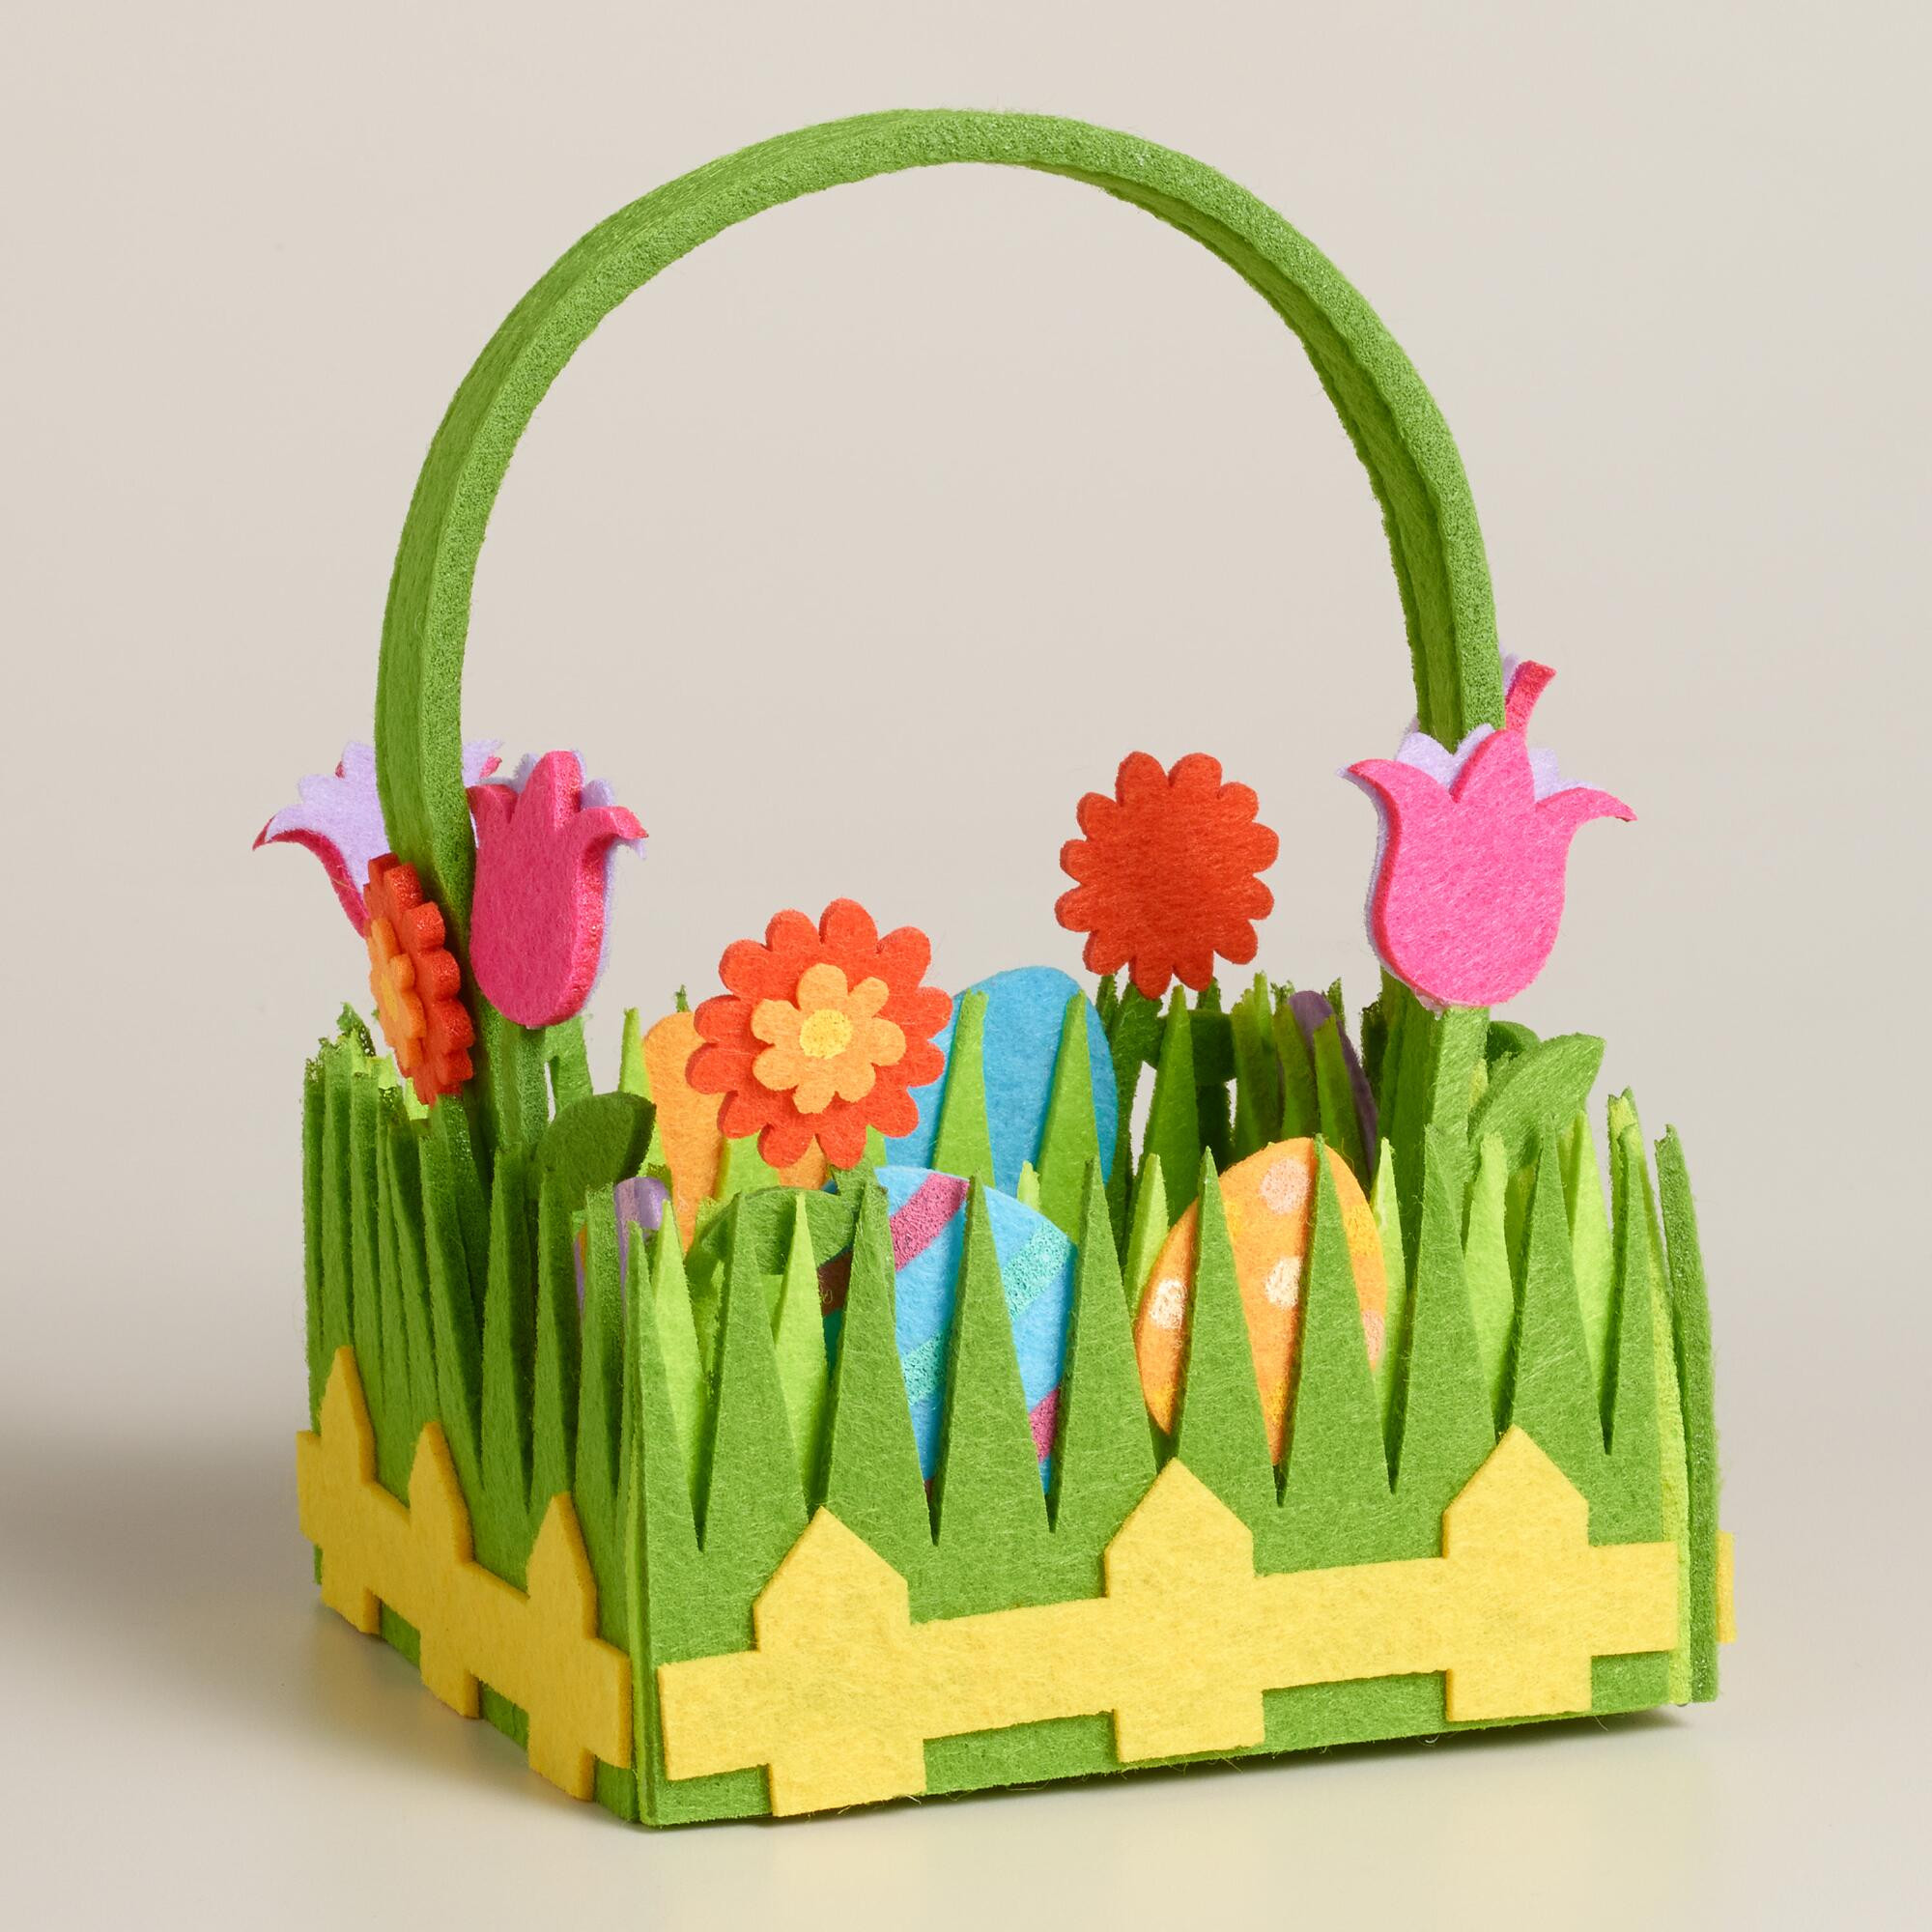 Small Easter Gifts
 Small Felt Grass Easter Basket